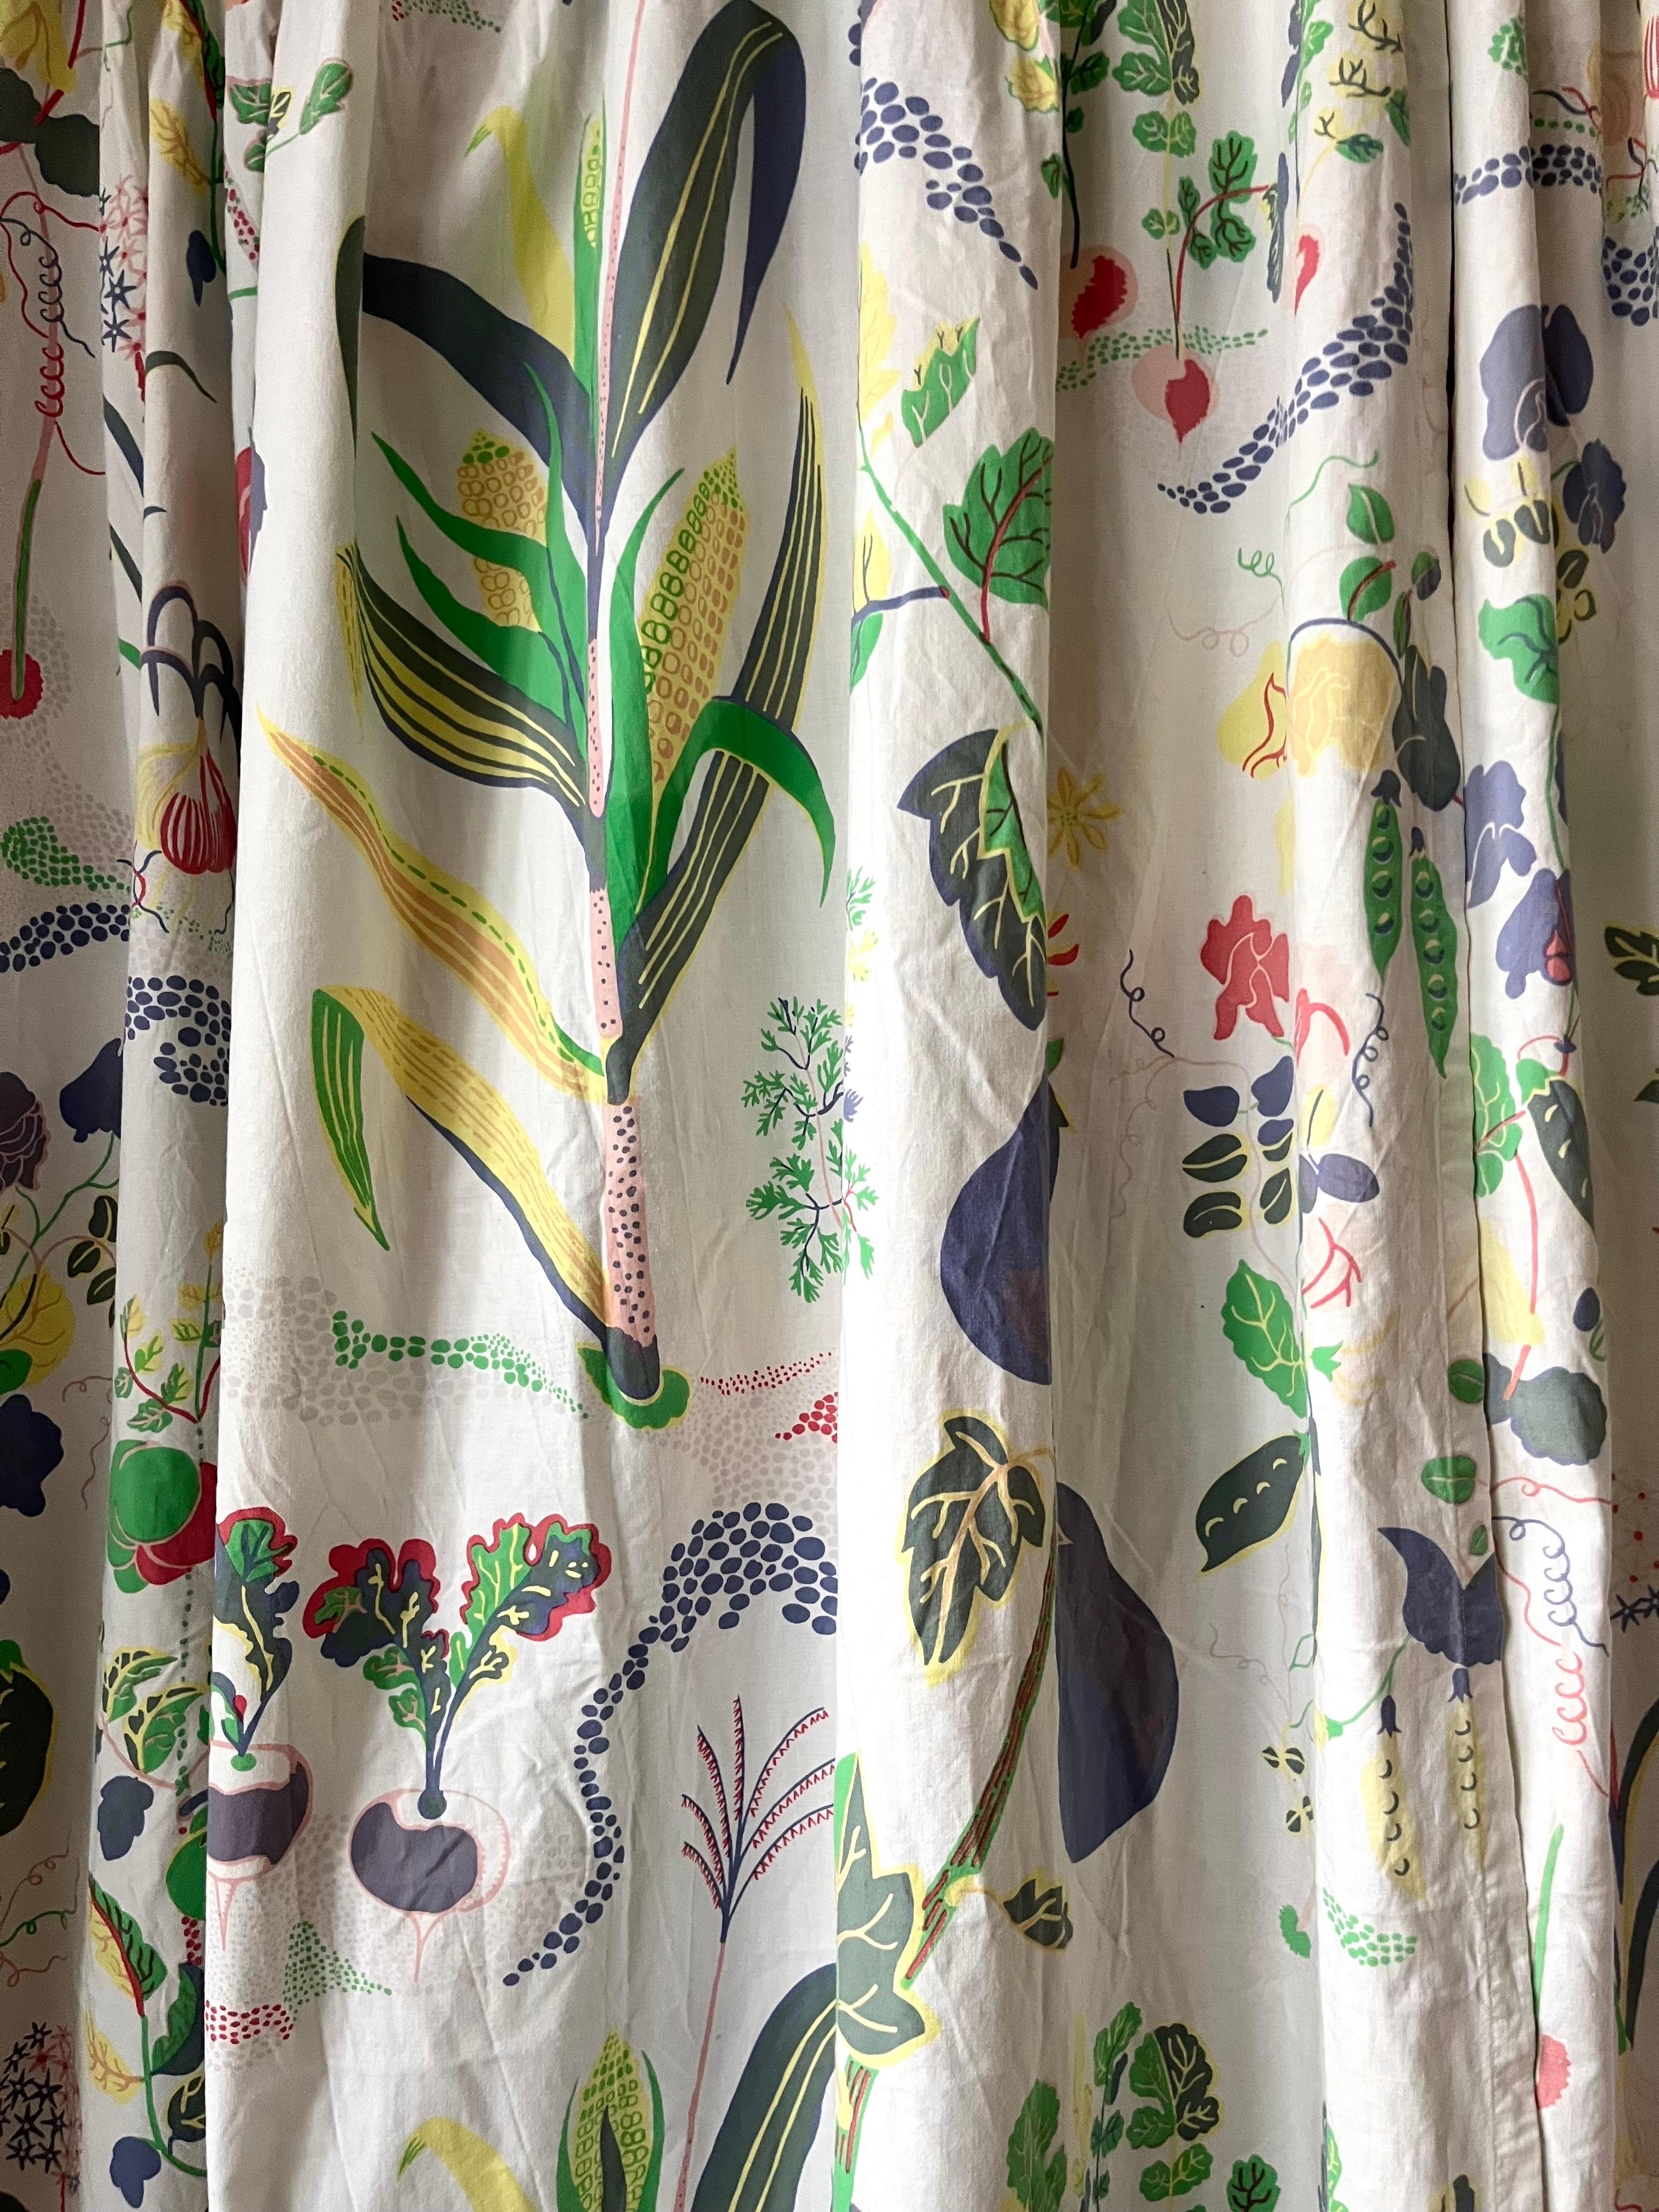 Pair of long Vintage Josef Frank Curtains for Svenskt Tenn 'Vitamins'

Add Swedish Modern charm to your living space with this exquisite pair of vintage Josef Frank for Svenskt Tenn curtains. Featuring the iconic 'Vitamins' pattern, these curtains